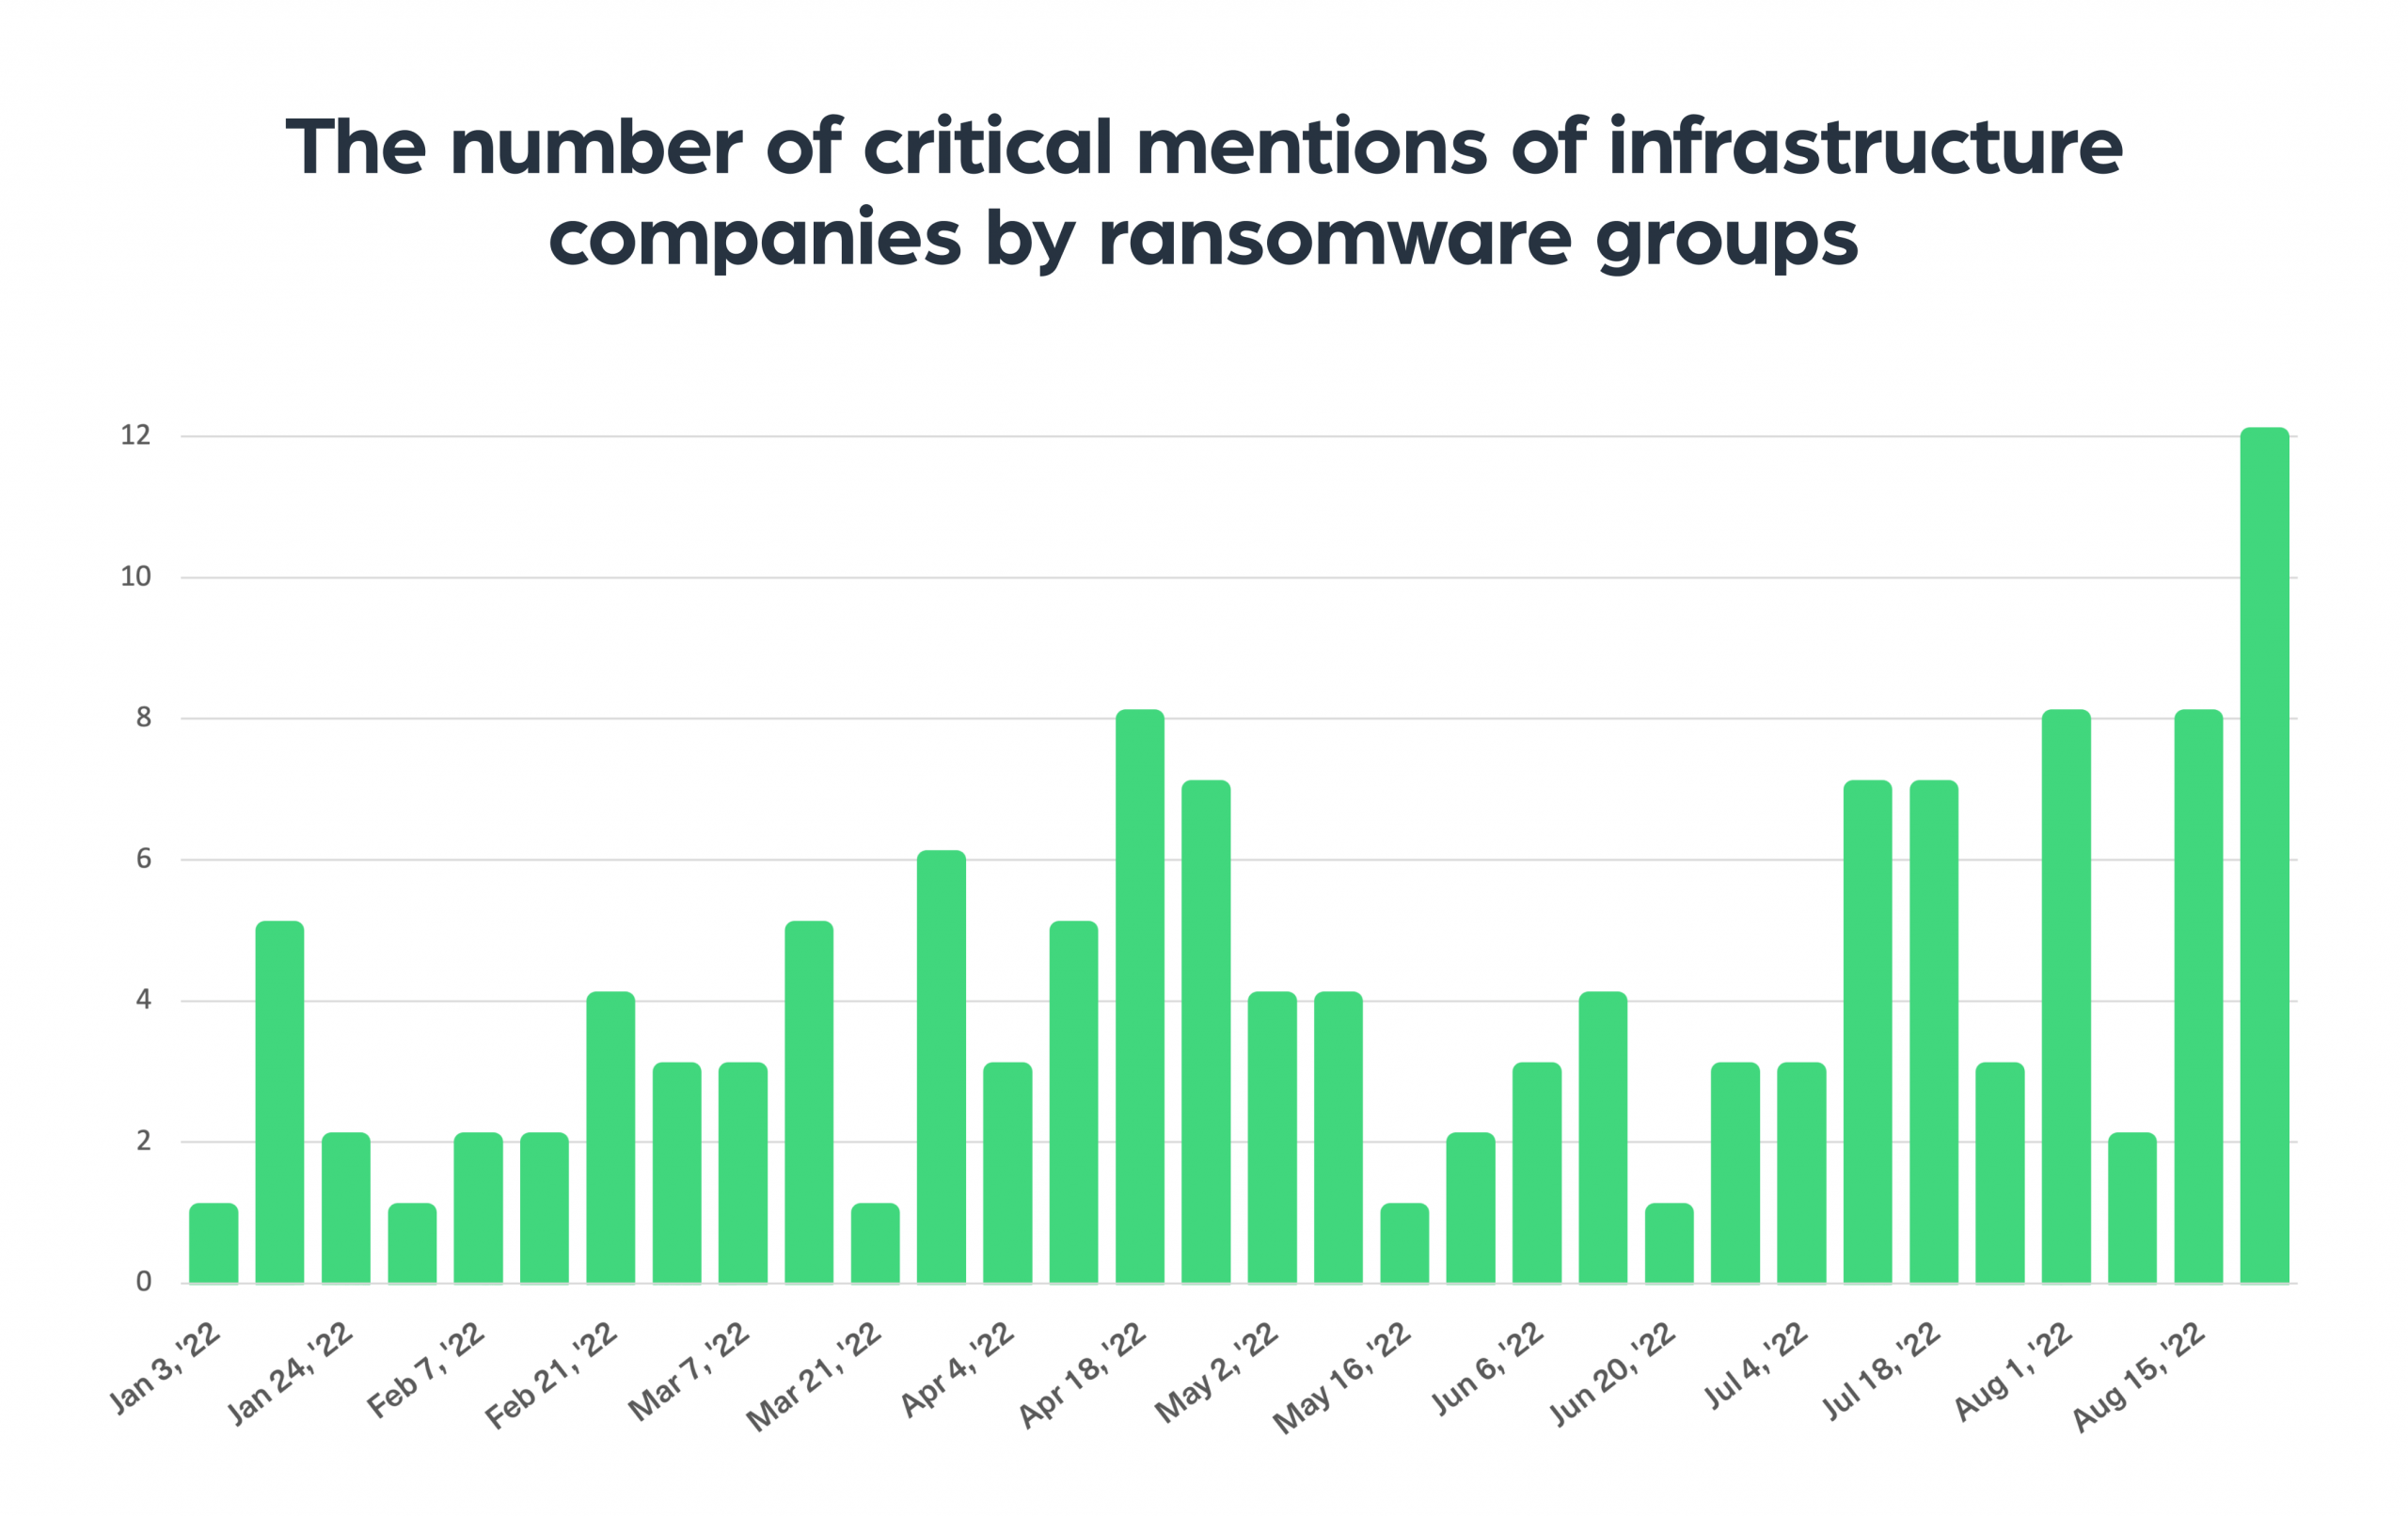 The number of critical mentions of infrastructure companies by ransomware groups